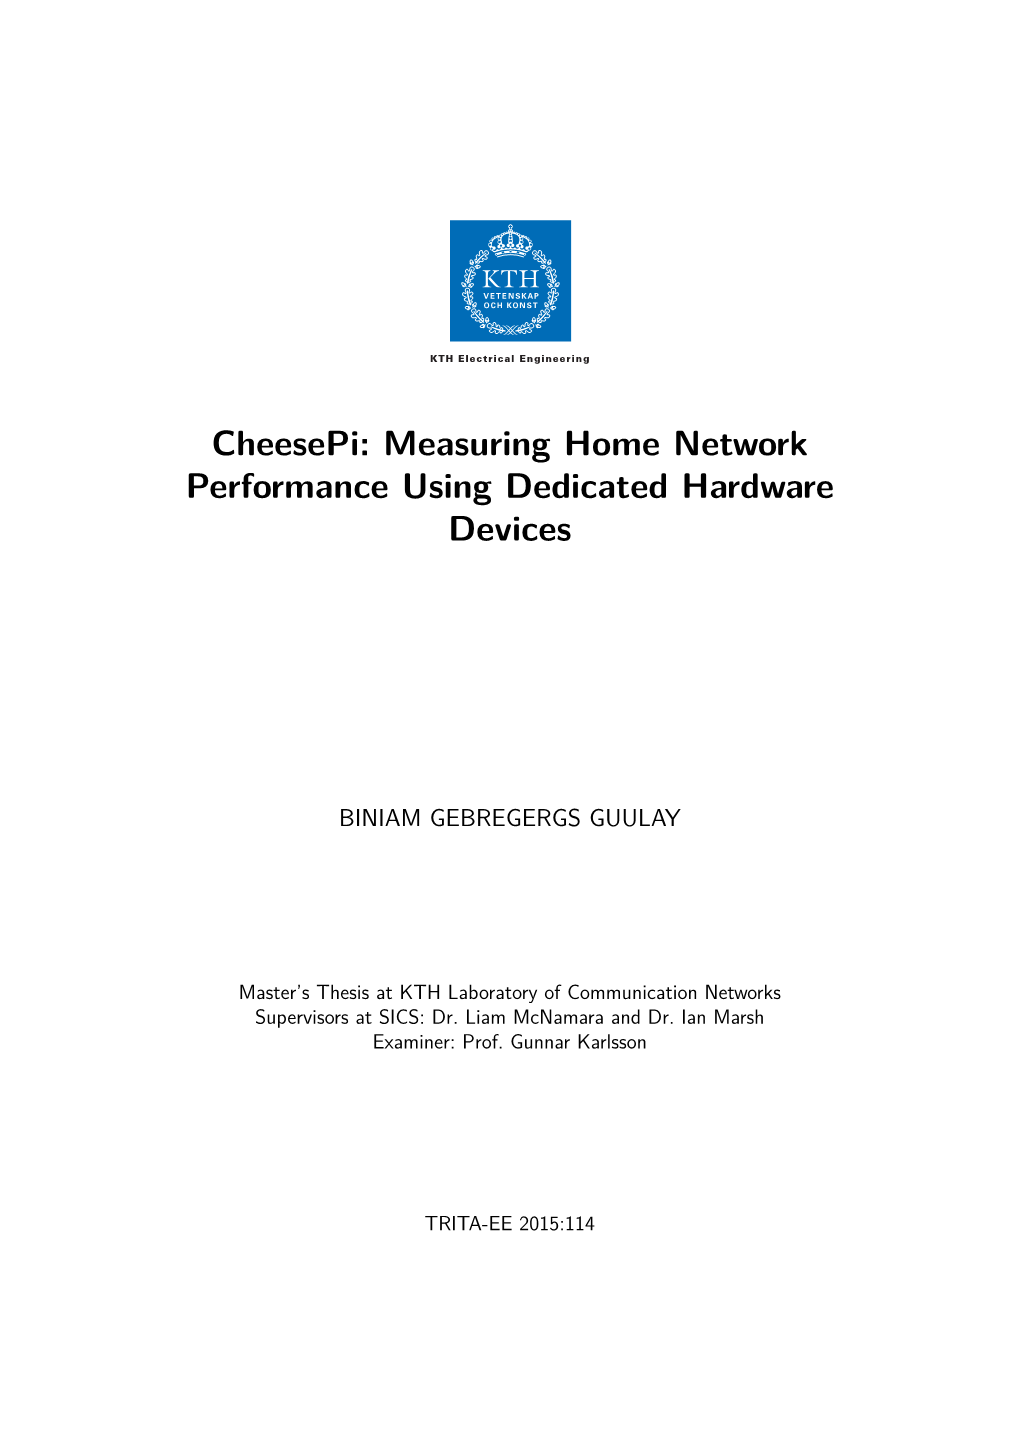 Measuring Home Network Performance Using Dedicated Hardware Devices